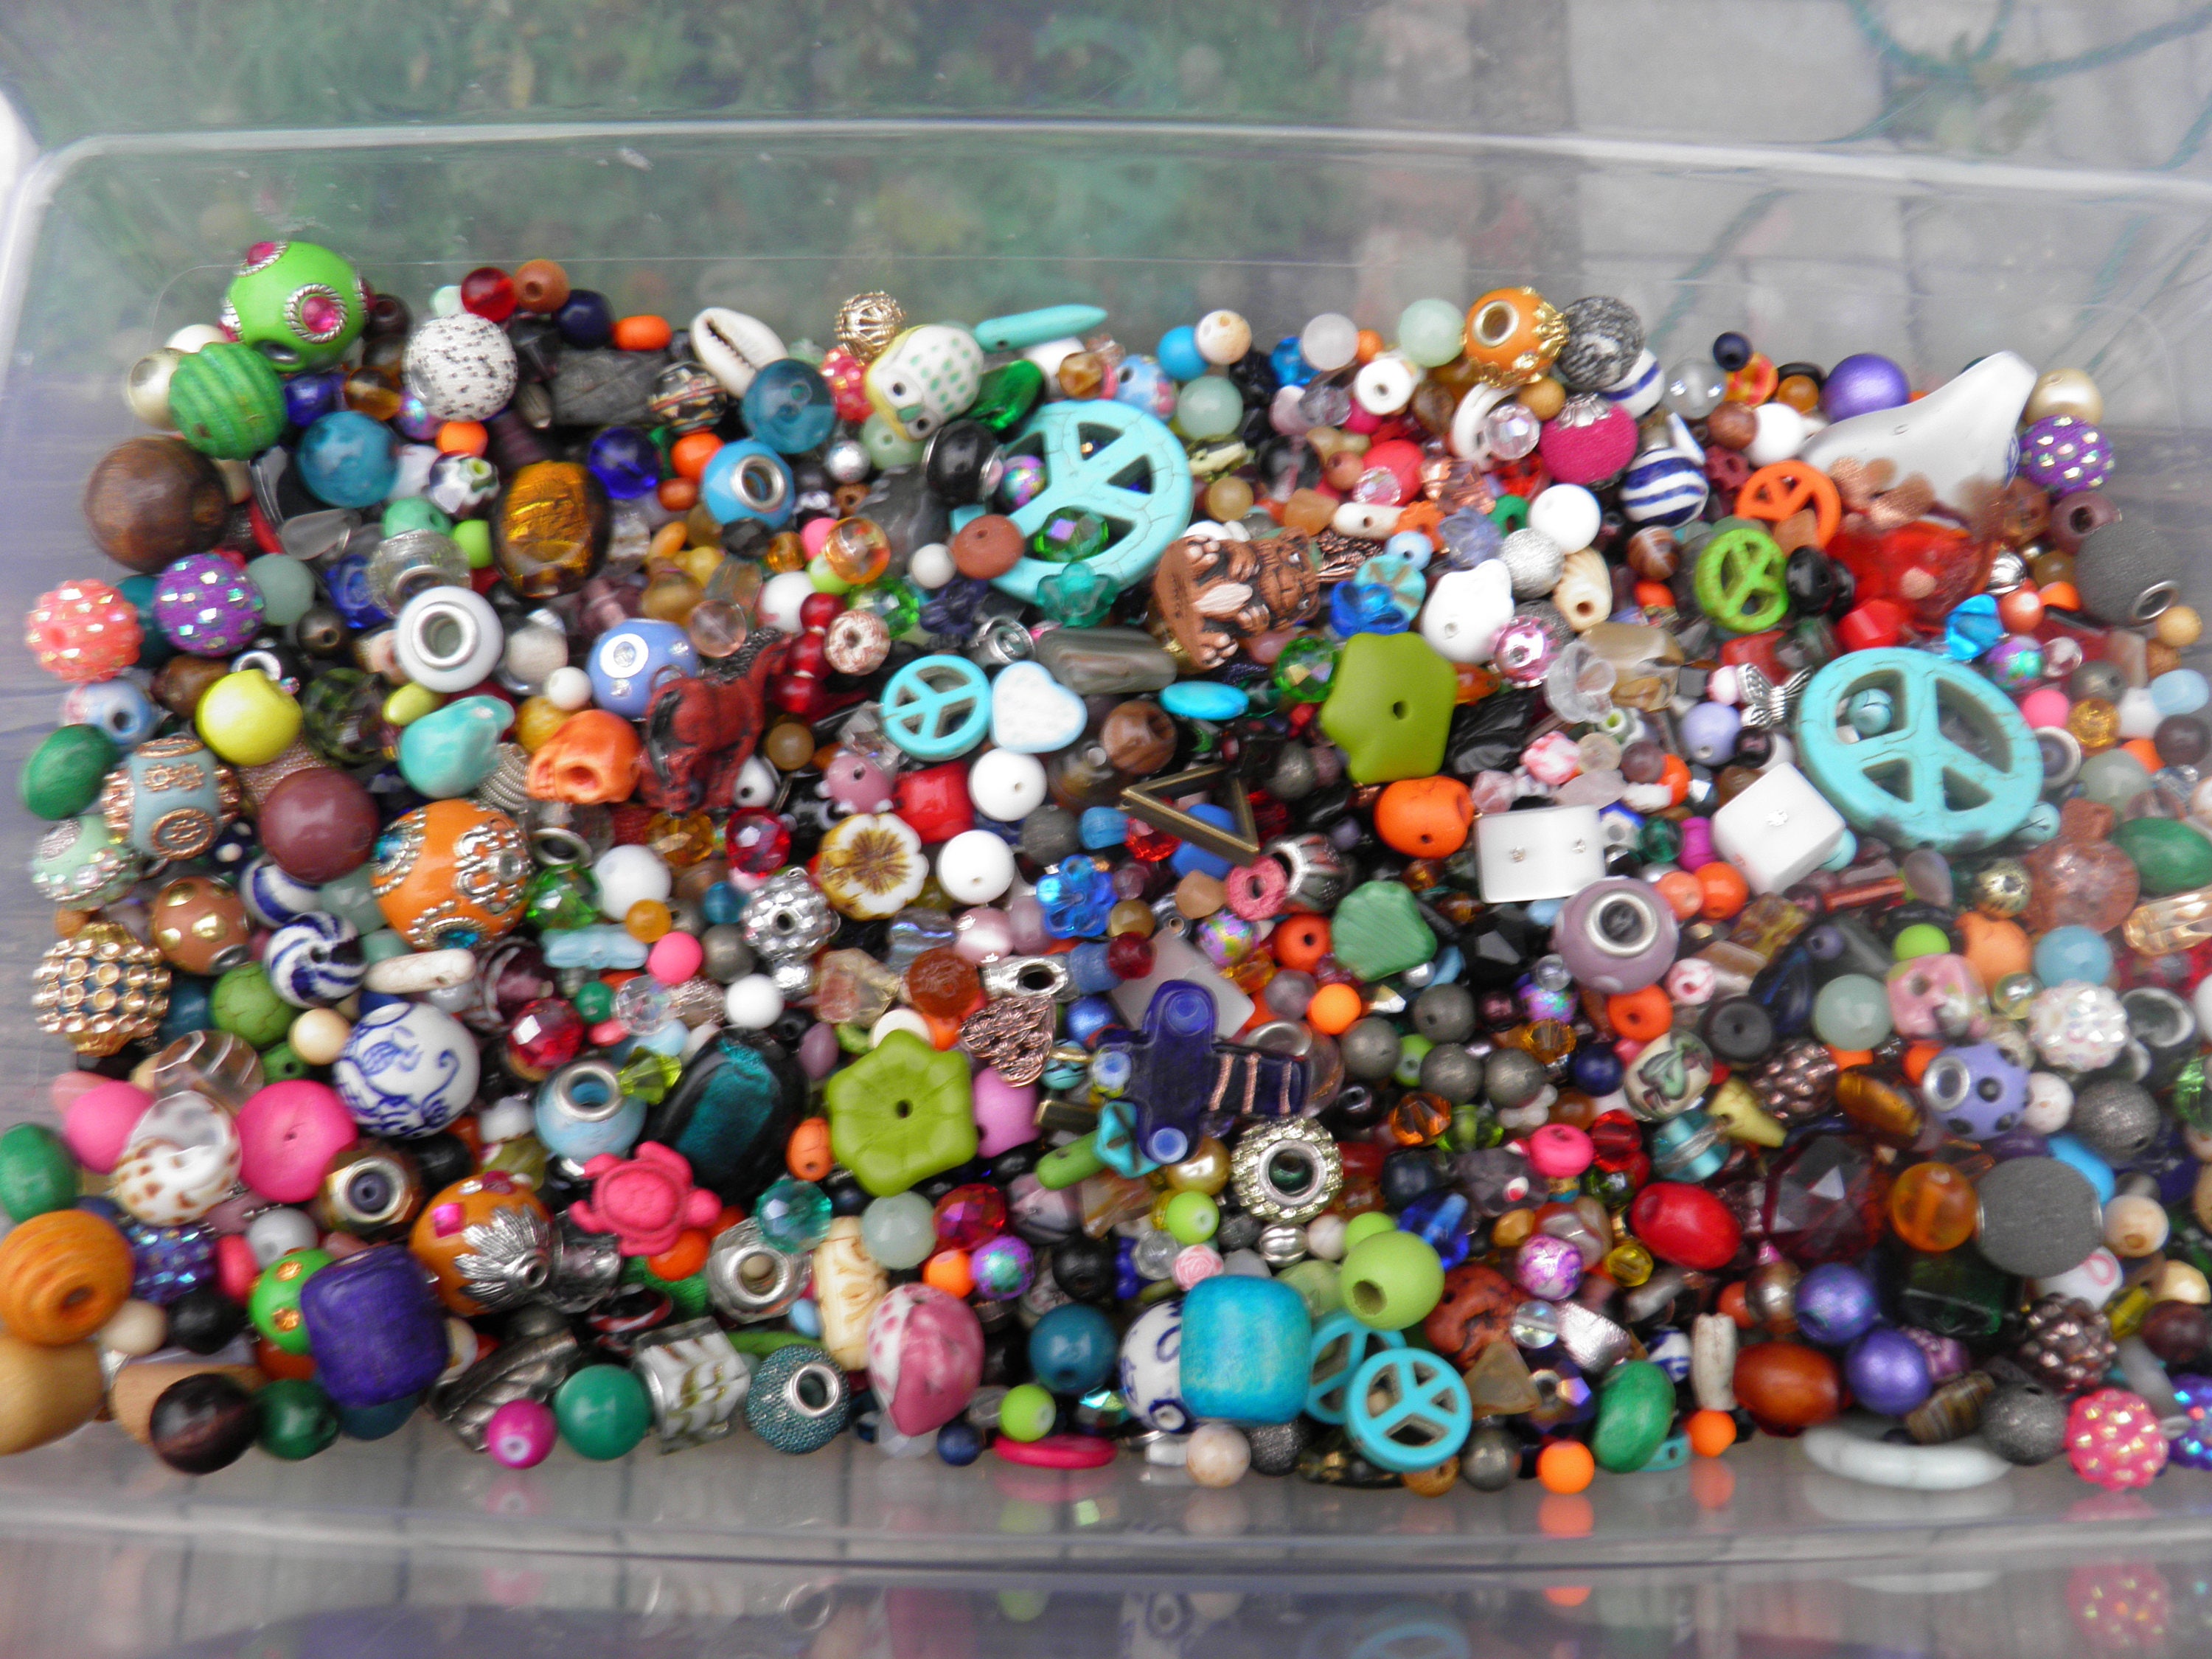 Czech Glass Beads Mix for Jewelry Making, Surprise Grab a Bag 20g Bead  Soup, DIY Beading Supplies -  Denmark